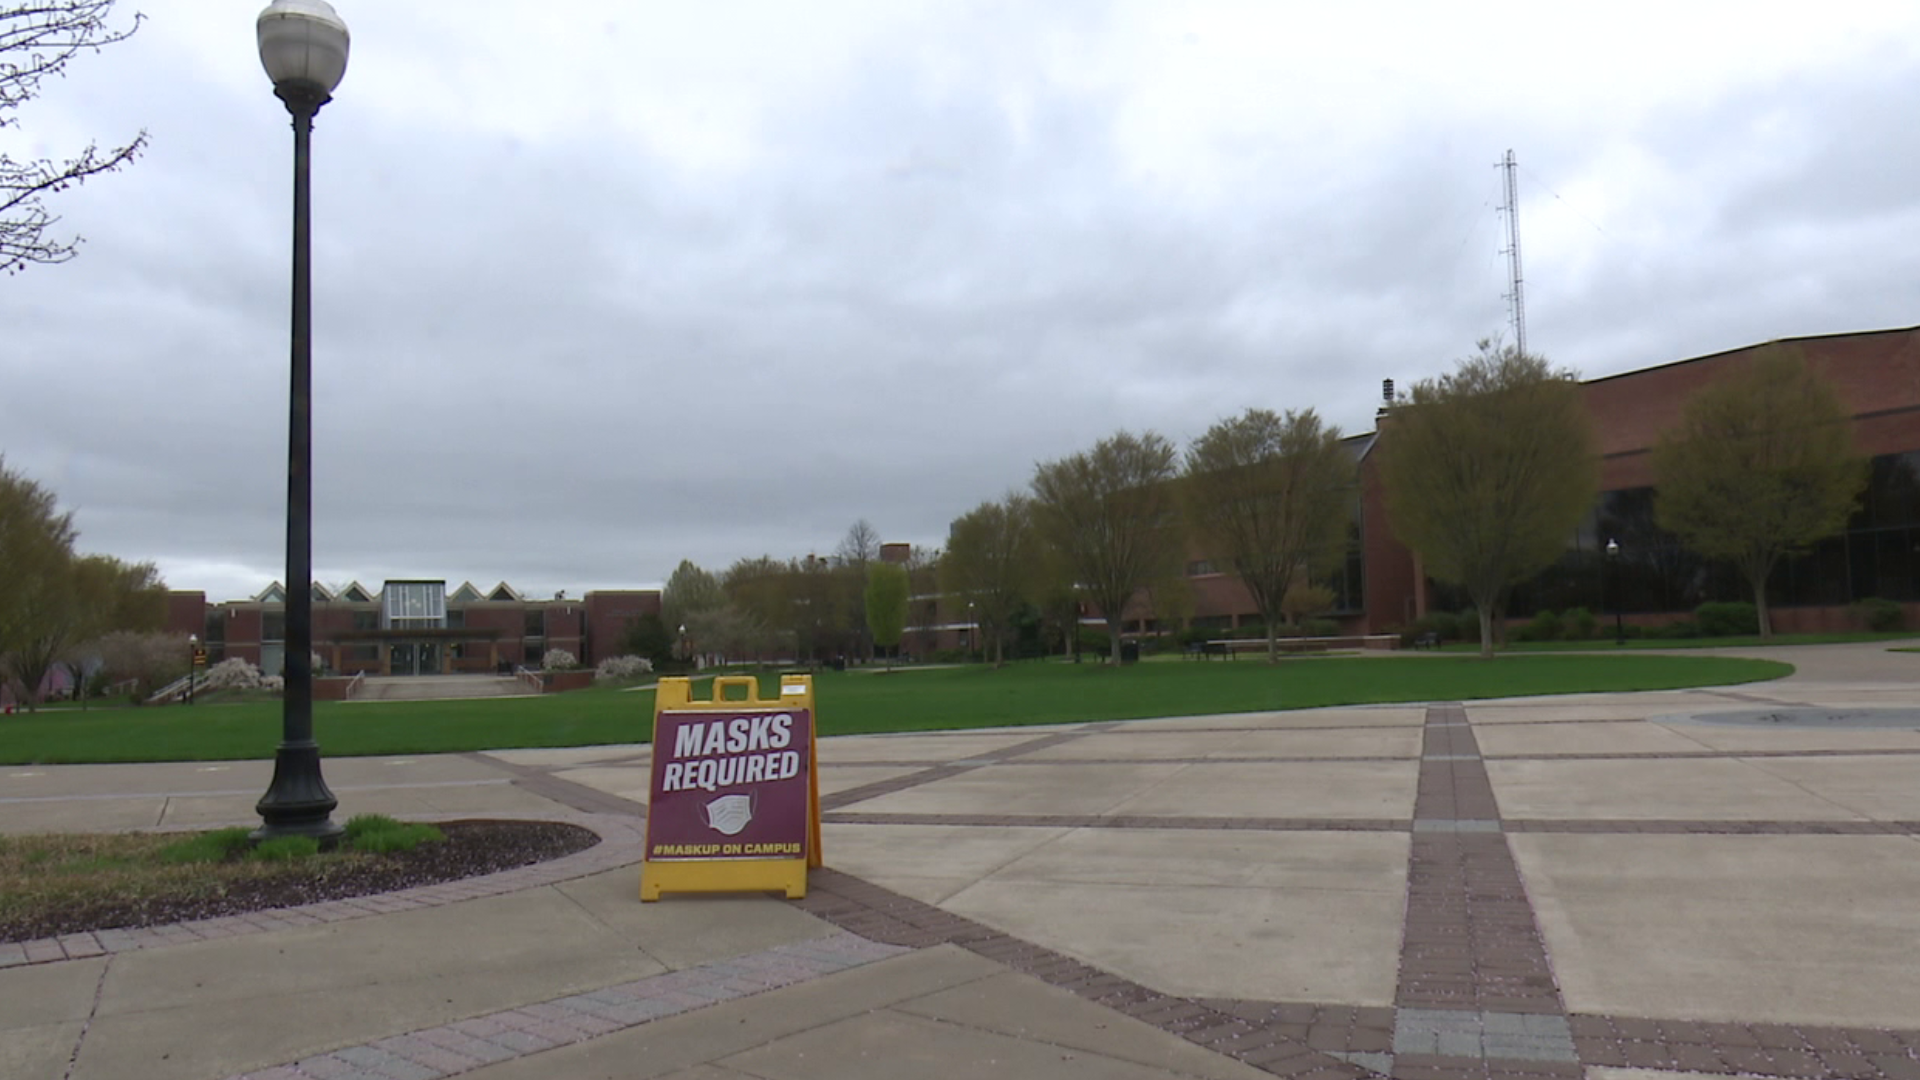 Newswatch 16's Elizabeth Worthington visited one university in Columbia County to hear students' thoughts and find out what the plan is there.